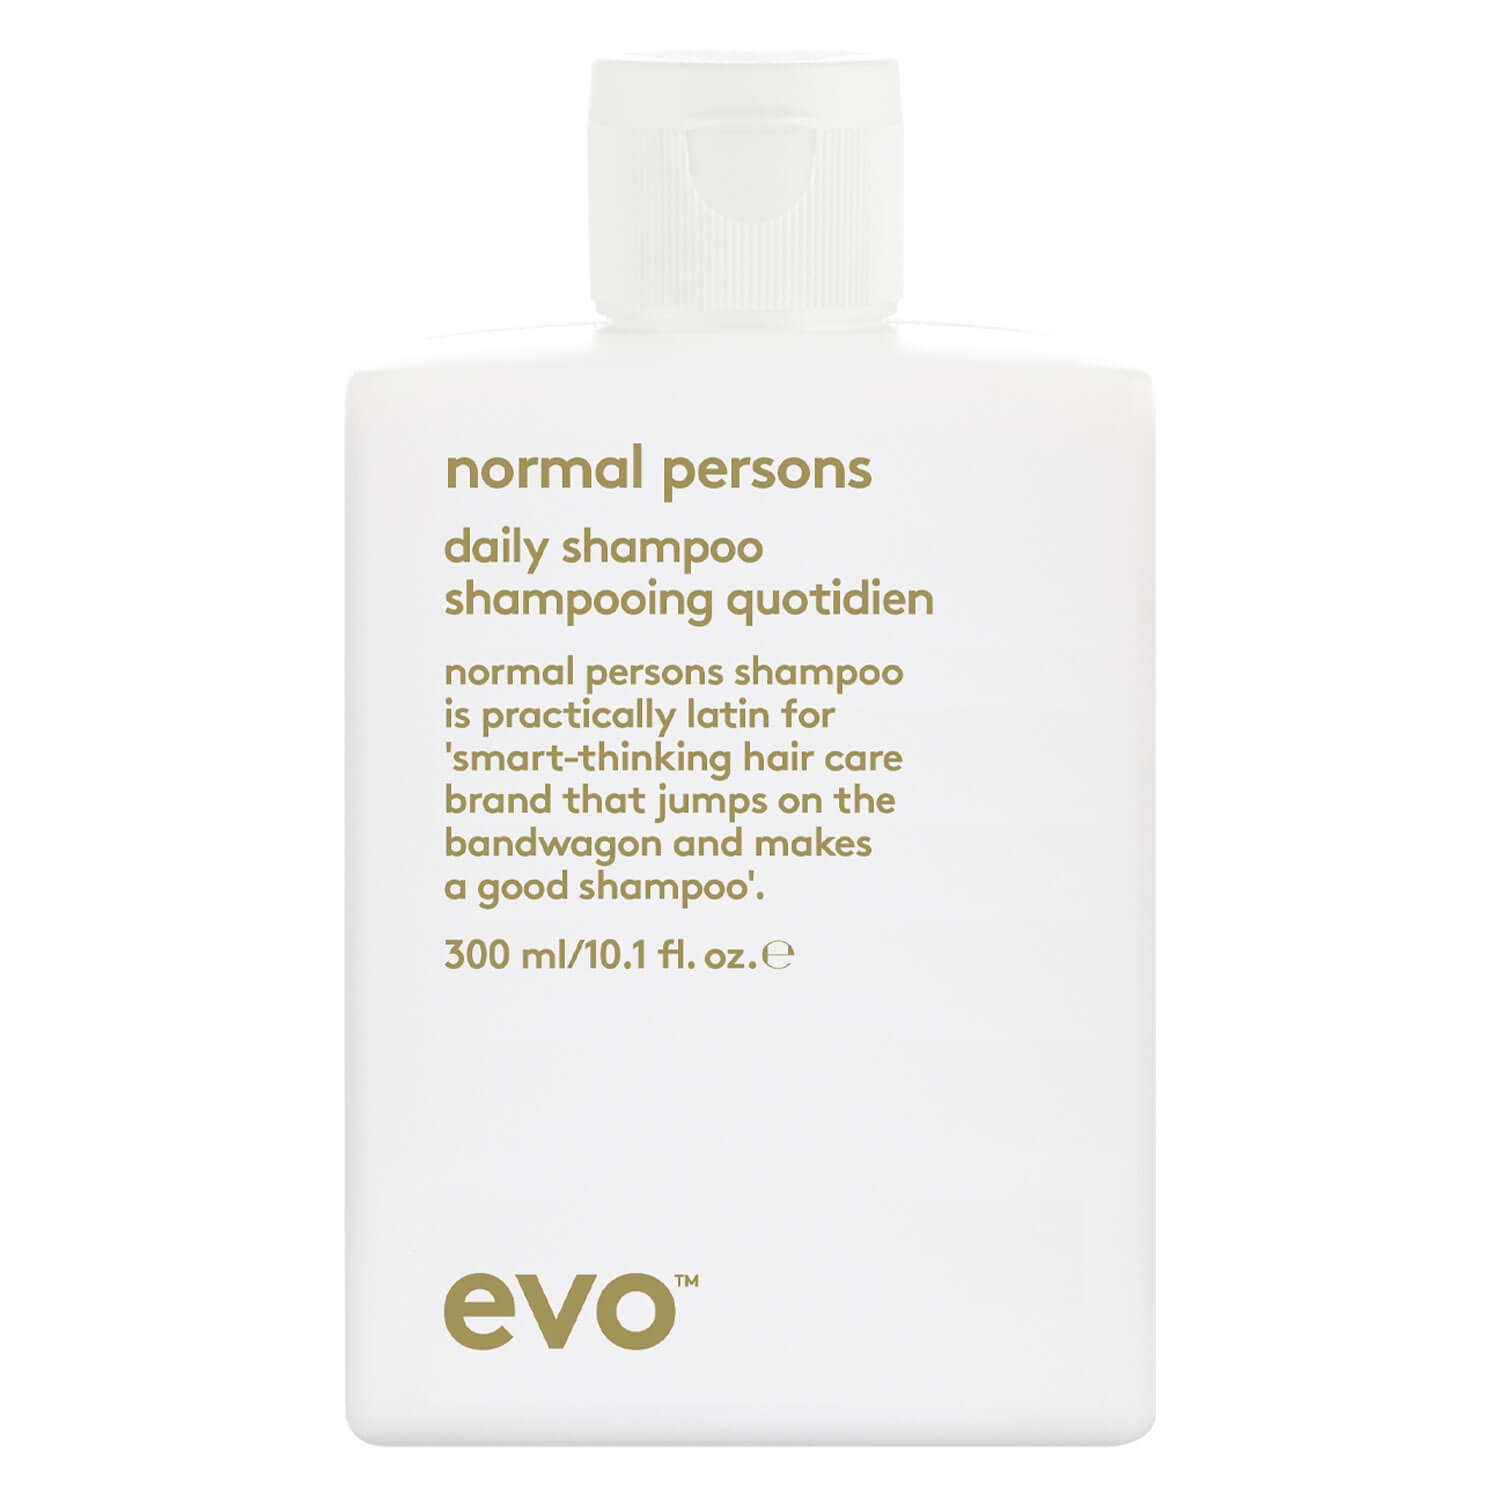 Product image from evo care - normal persons daily shampoo